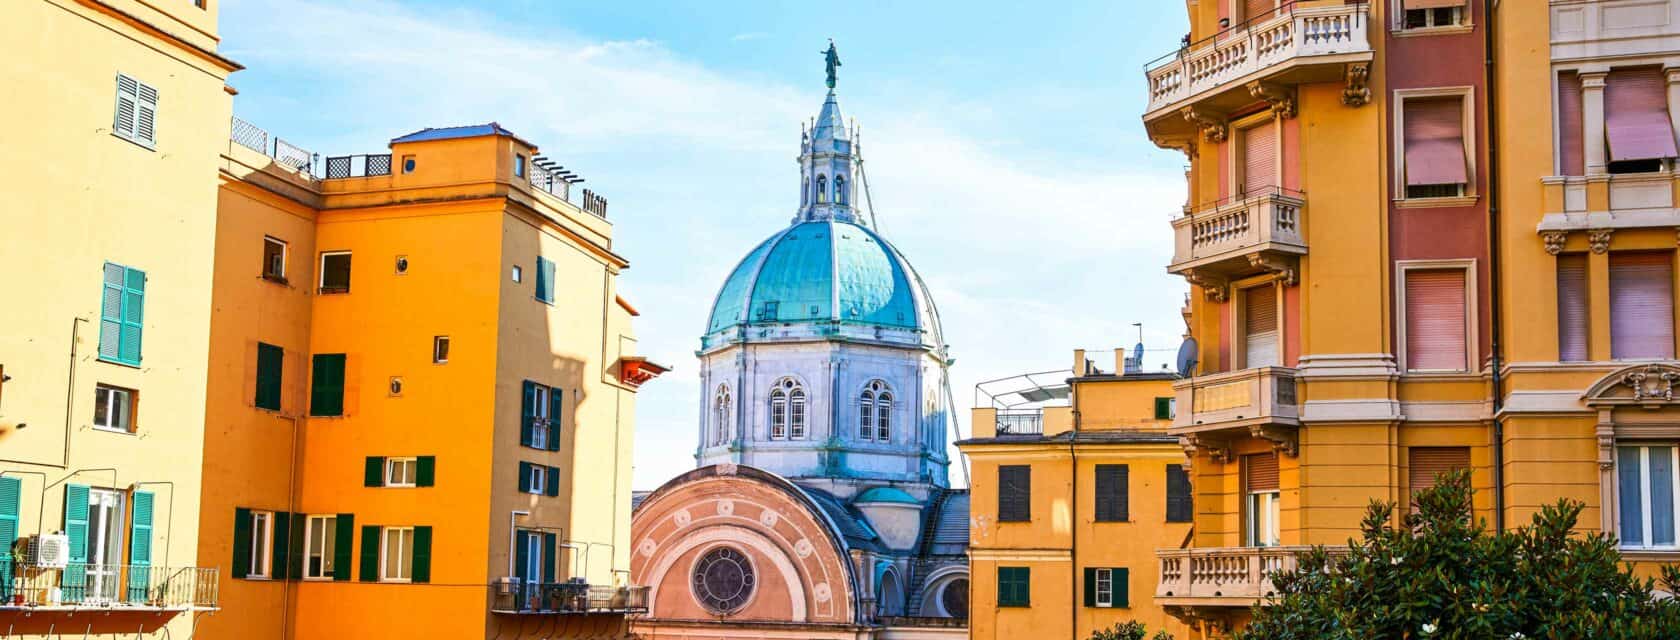 A view of a dome in the city of Genoa.